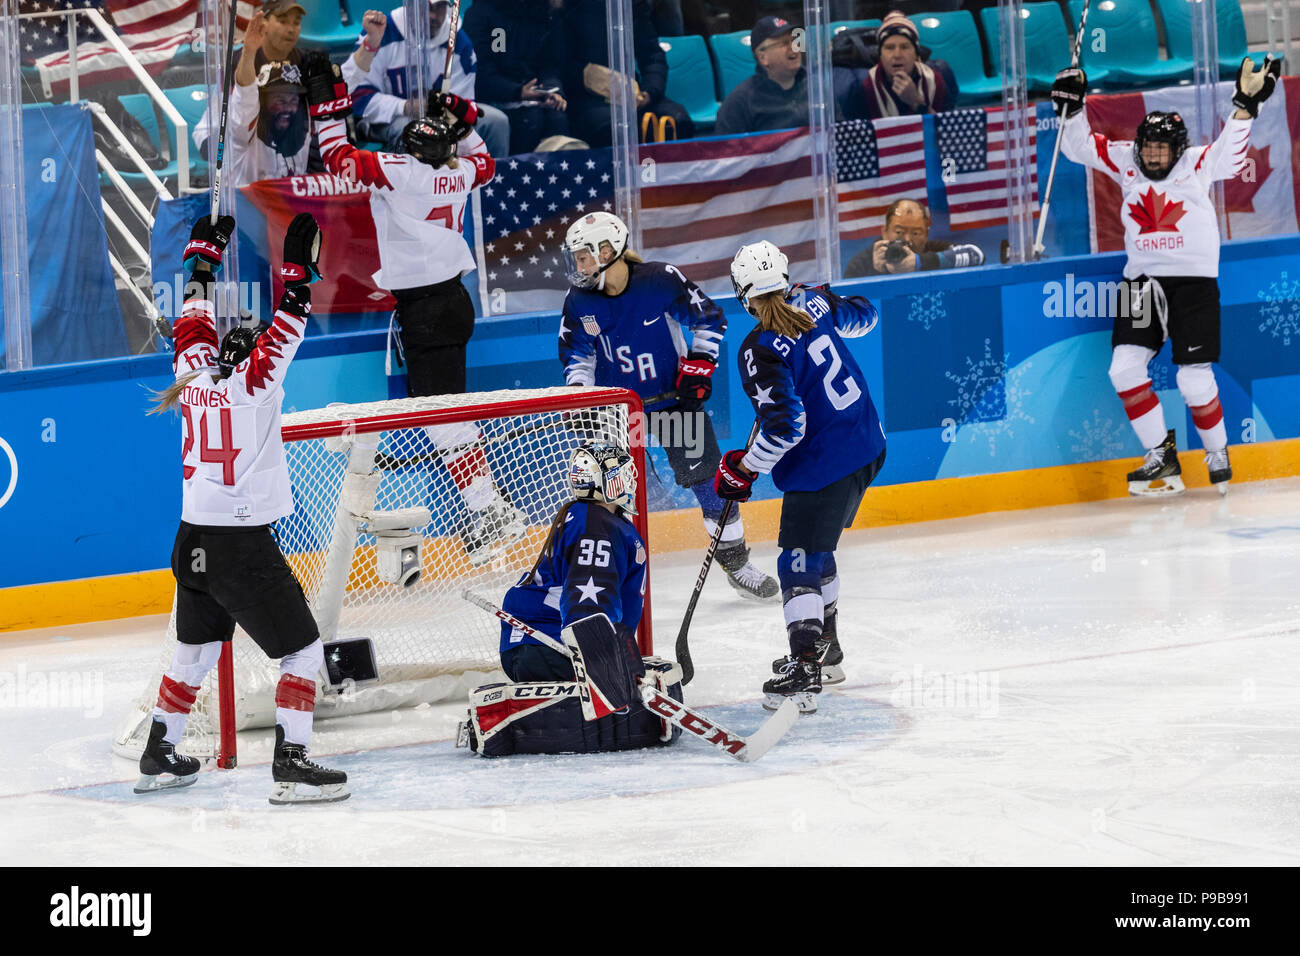 Team Canada celebrates scoring a goal in the Gold medal Women's Ice Hockey game vs Canada at the Olympic Winter Games PyeongChang 2018 Stock Photo